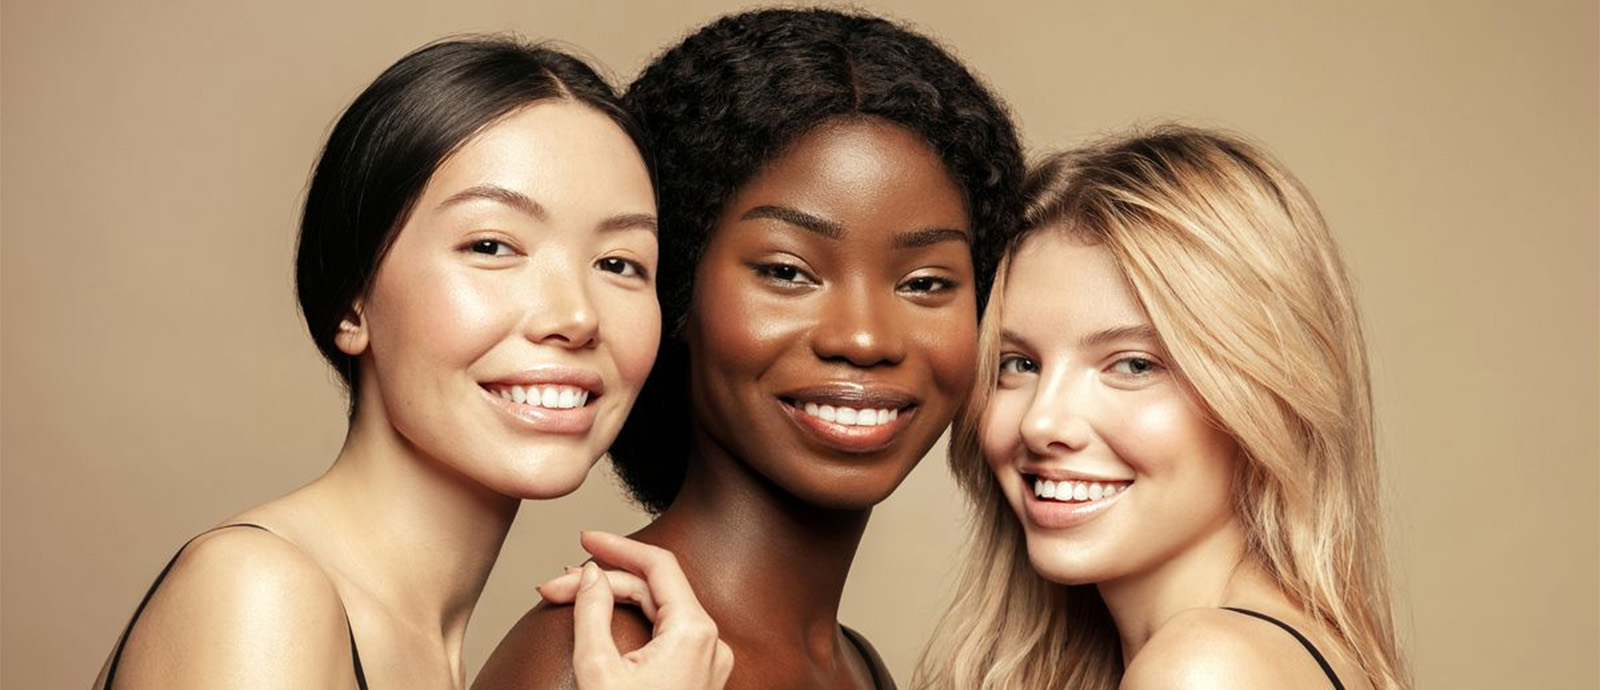 Three racially diverse women with different hair textures smiling